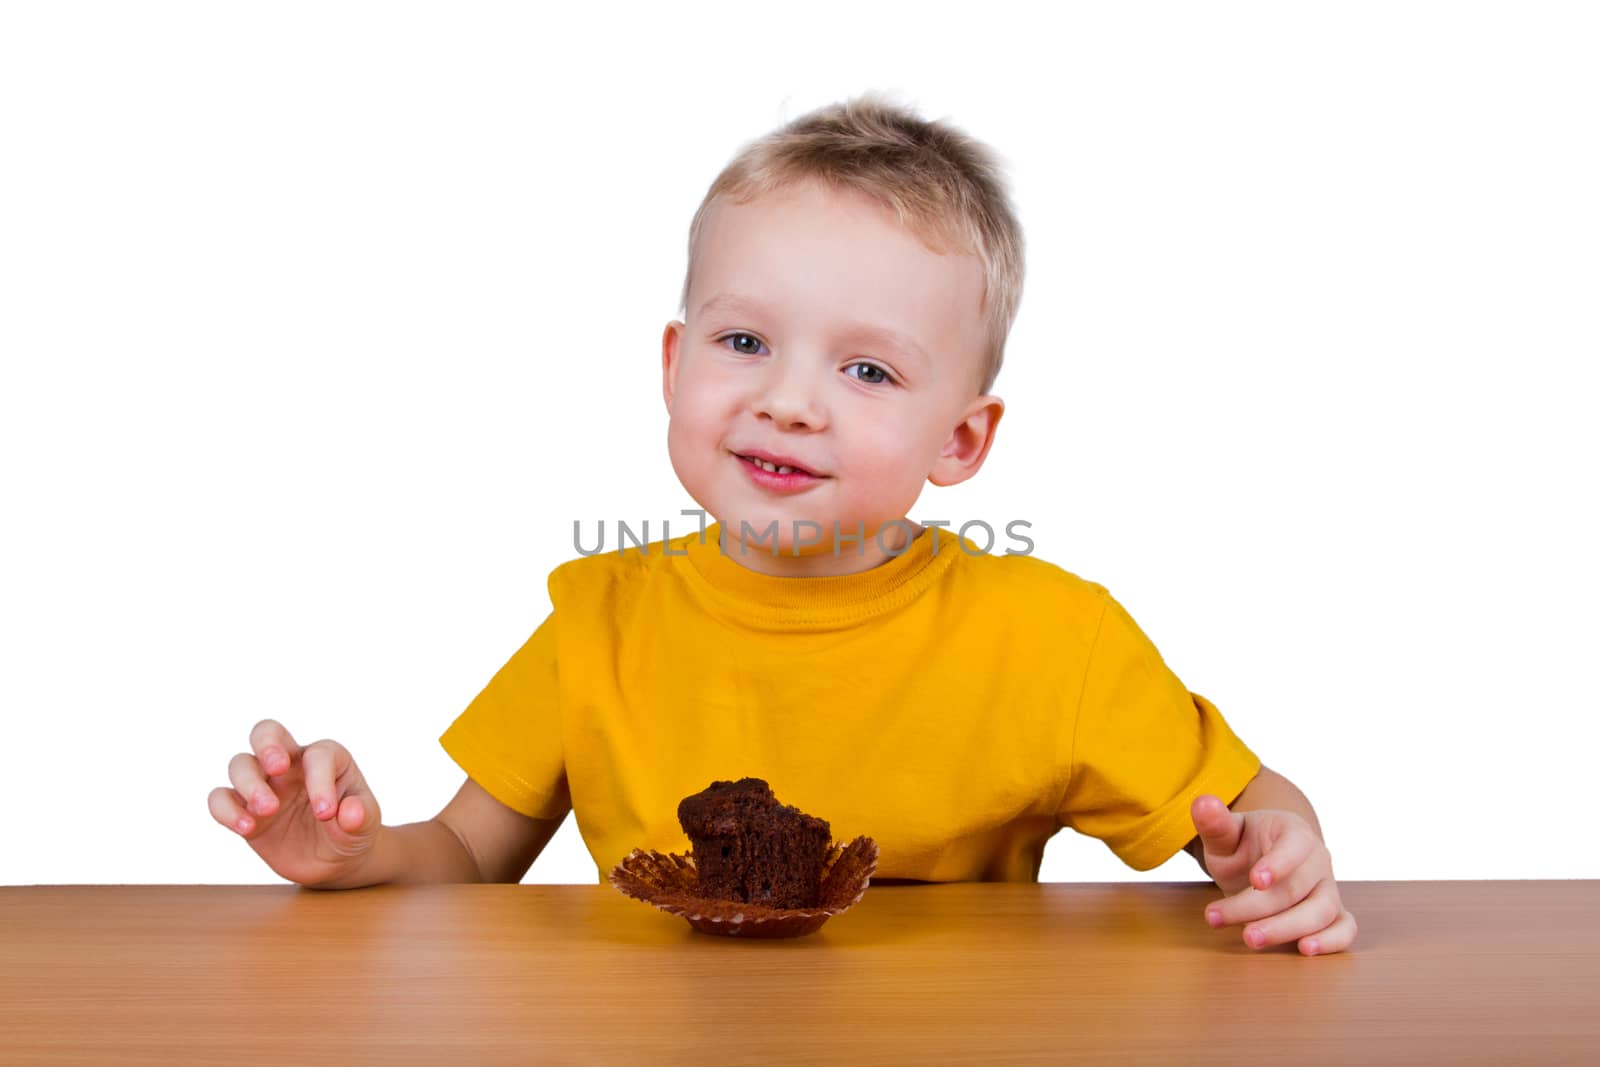 A small boy in yellow t-shirt eating a chocolate muffin. Isolated on white background